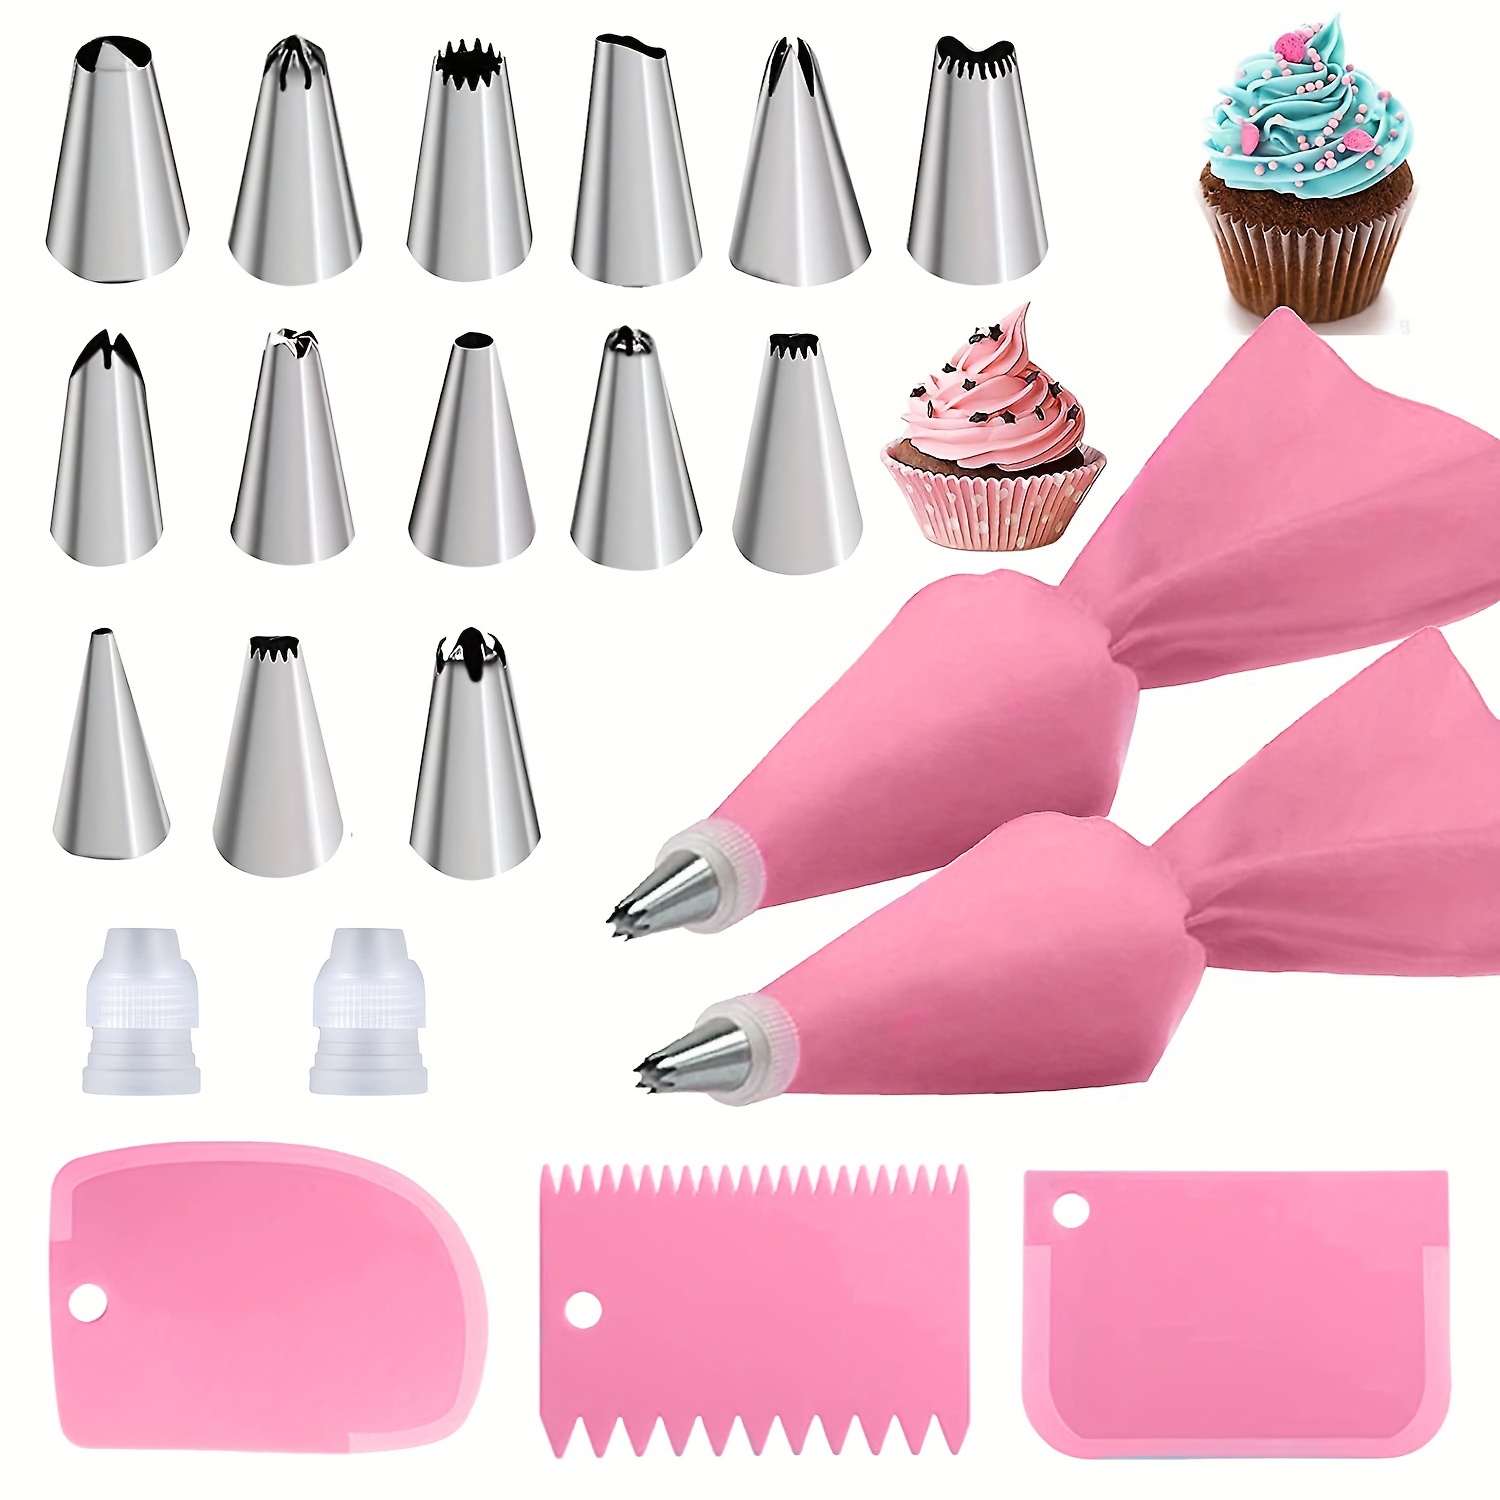 301Pcs Cake Decorating Kit, Cake Decorating Supplies With Cake Turntable  For Decorating, Pastry Piping Bag, Russian Piping Tips - AliExpress